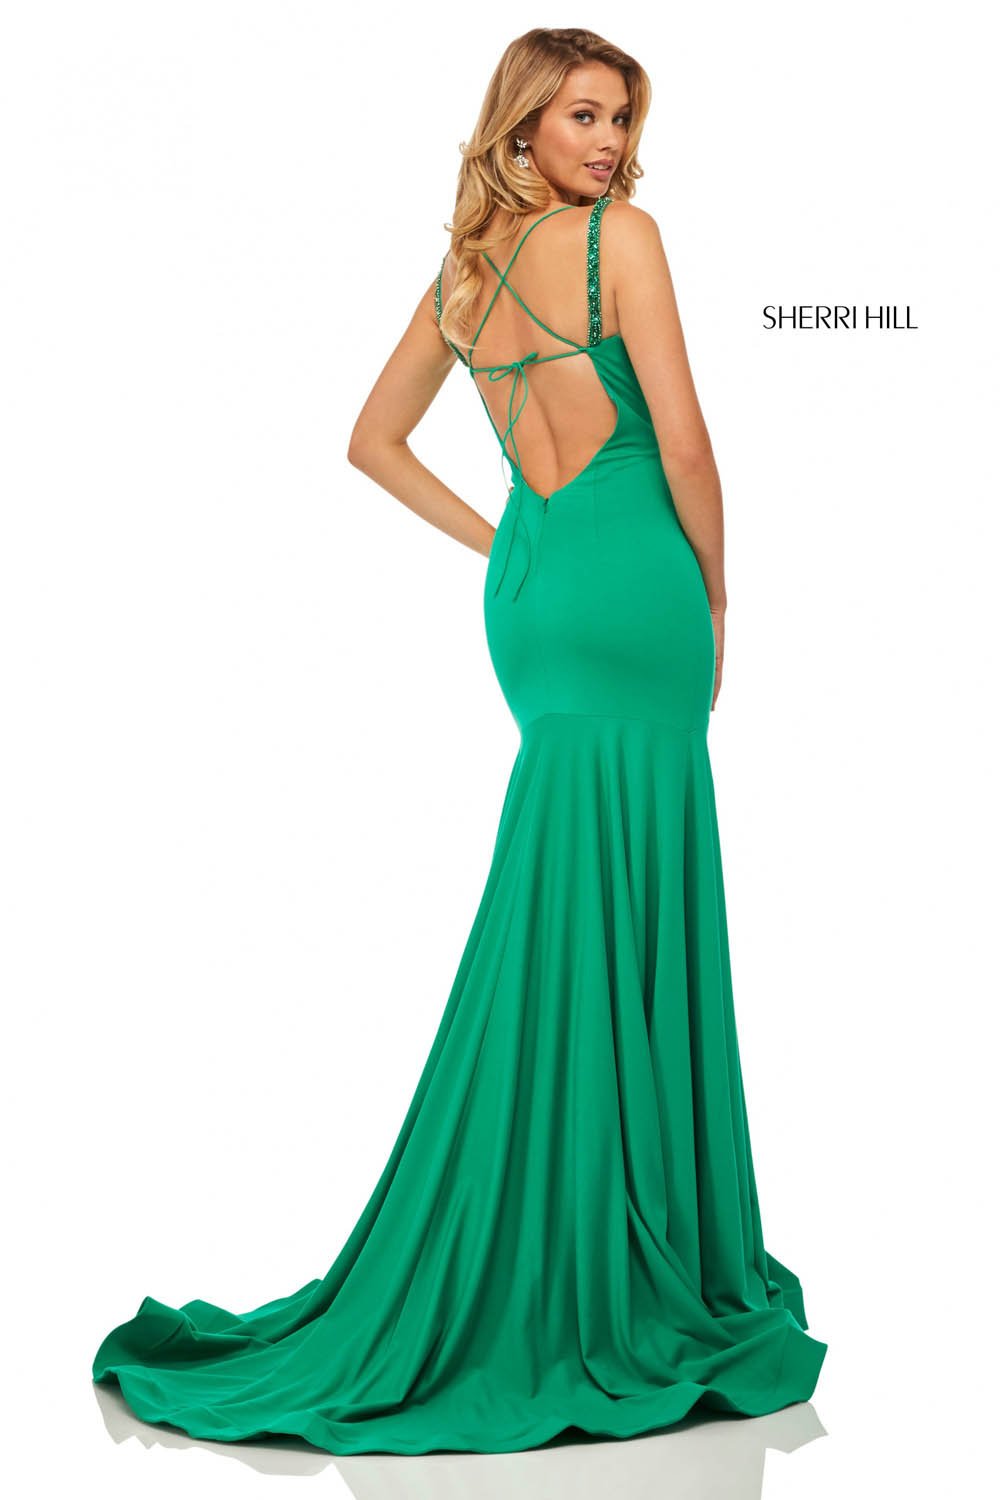 Sherri Hill 52883 dress images in these colors: Wine, Red, Emerald, Black.